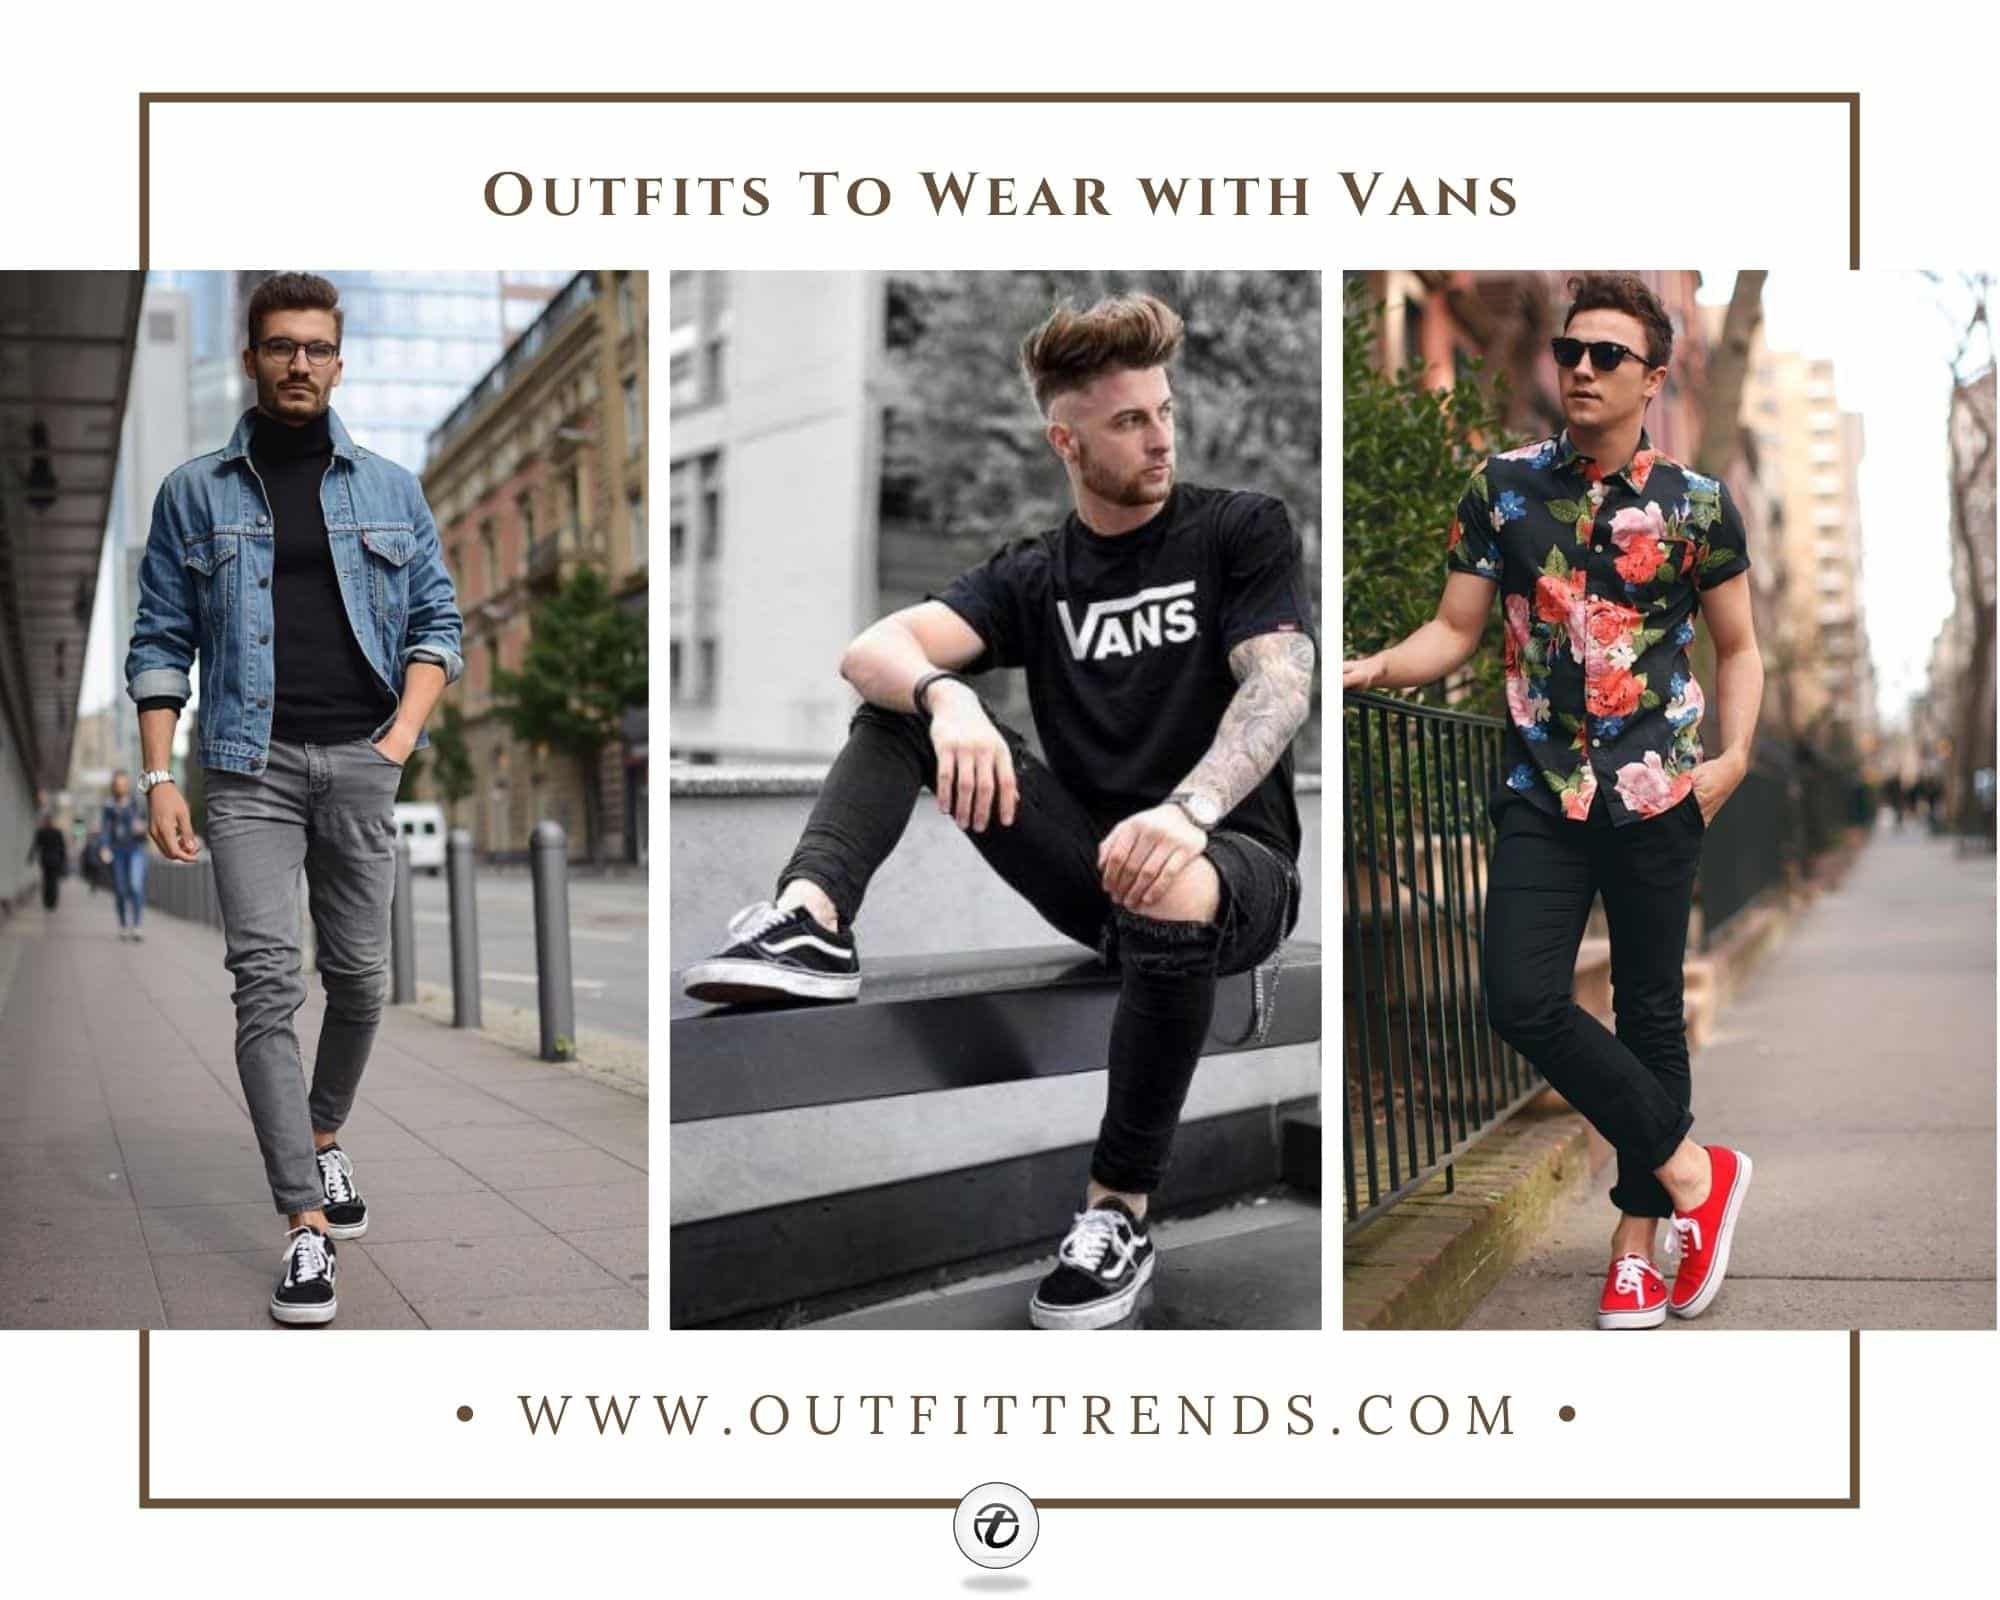 recuerdos oasis Ananiver Men's Outfits with Vans - 33 Best Ways to Wear Vans Shoes